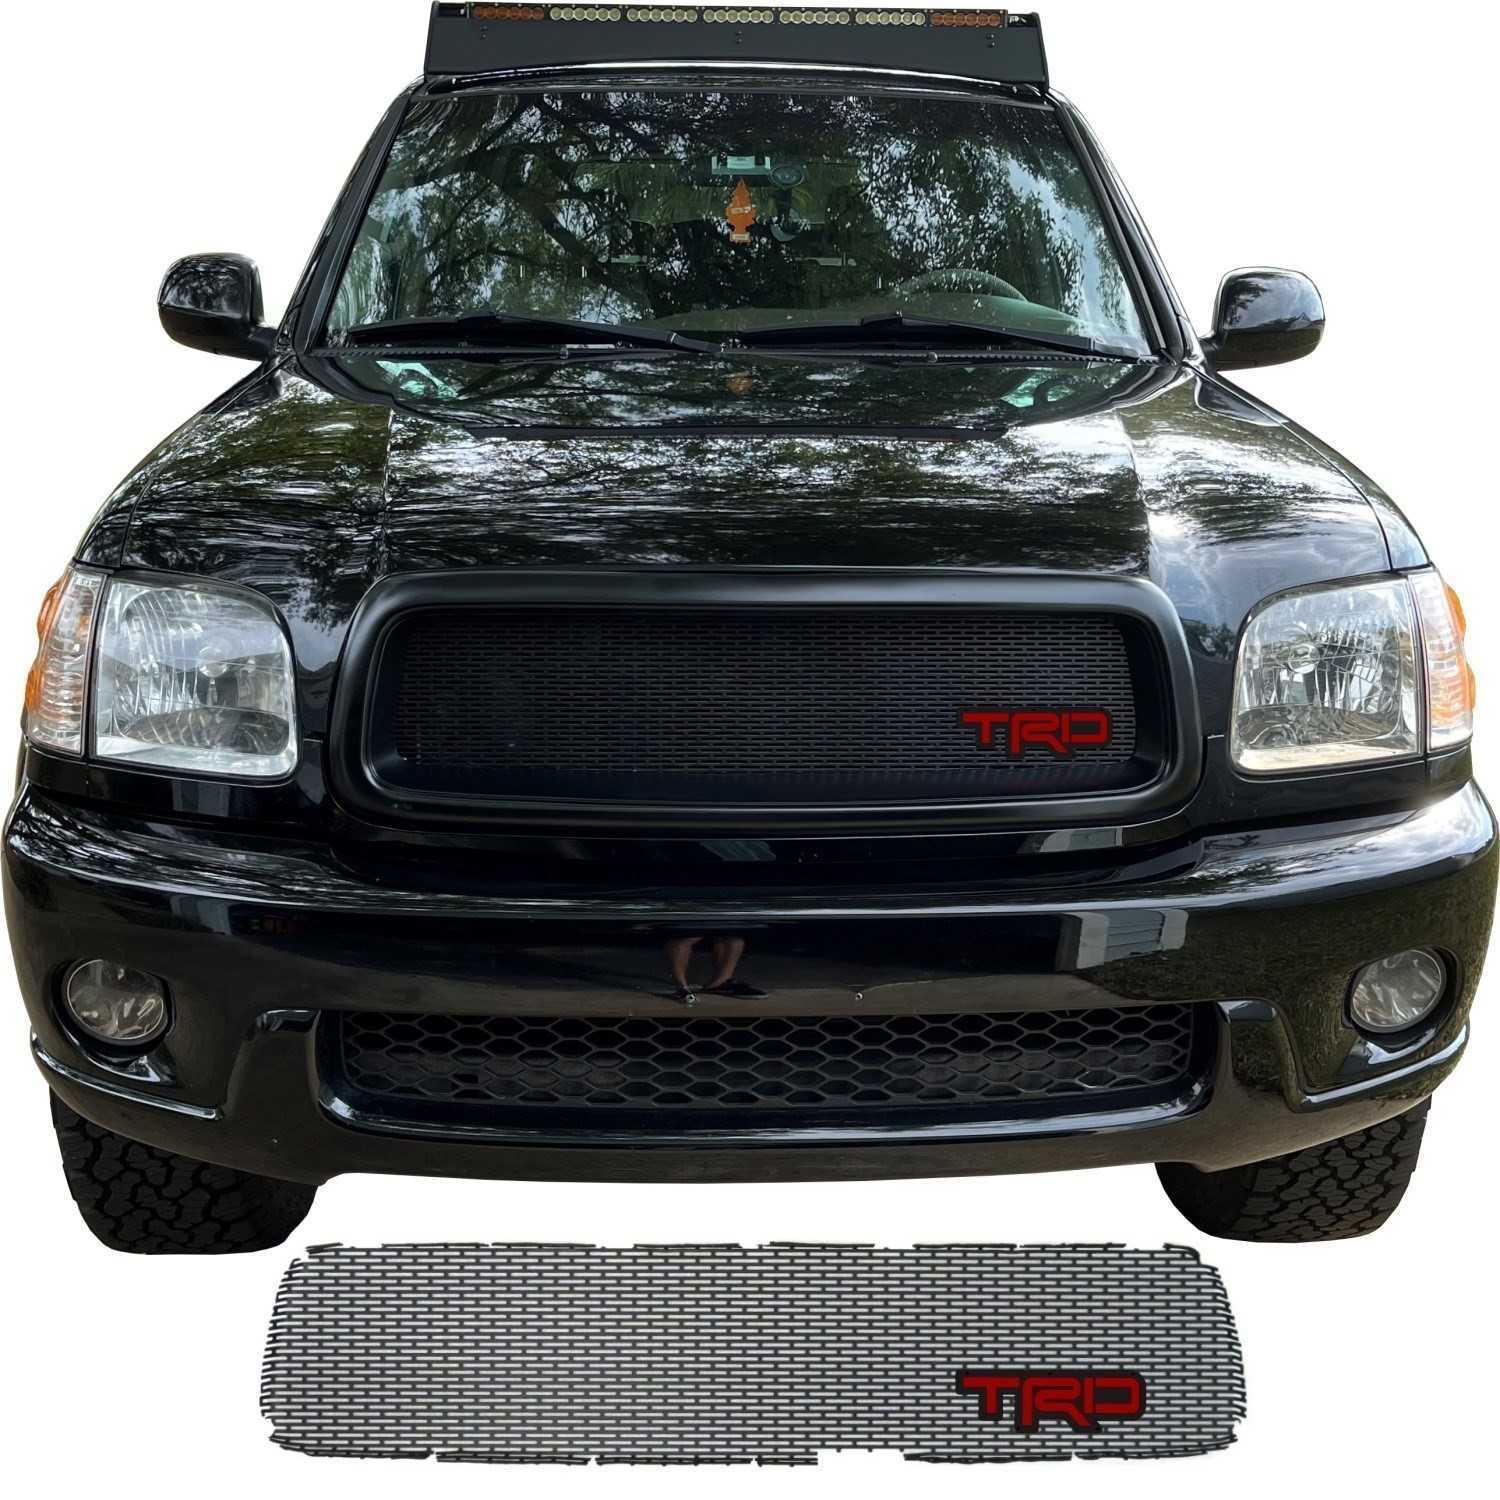 2001 - 2004 Toyota Sequoia Grill Mesh with TRD Emblem